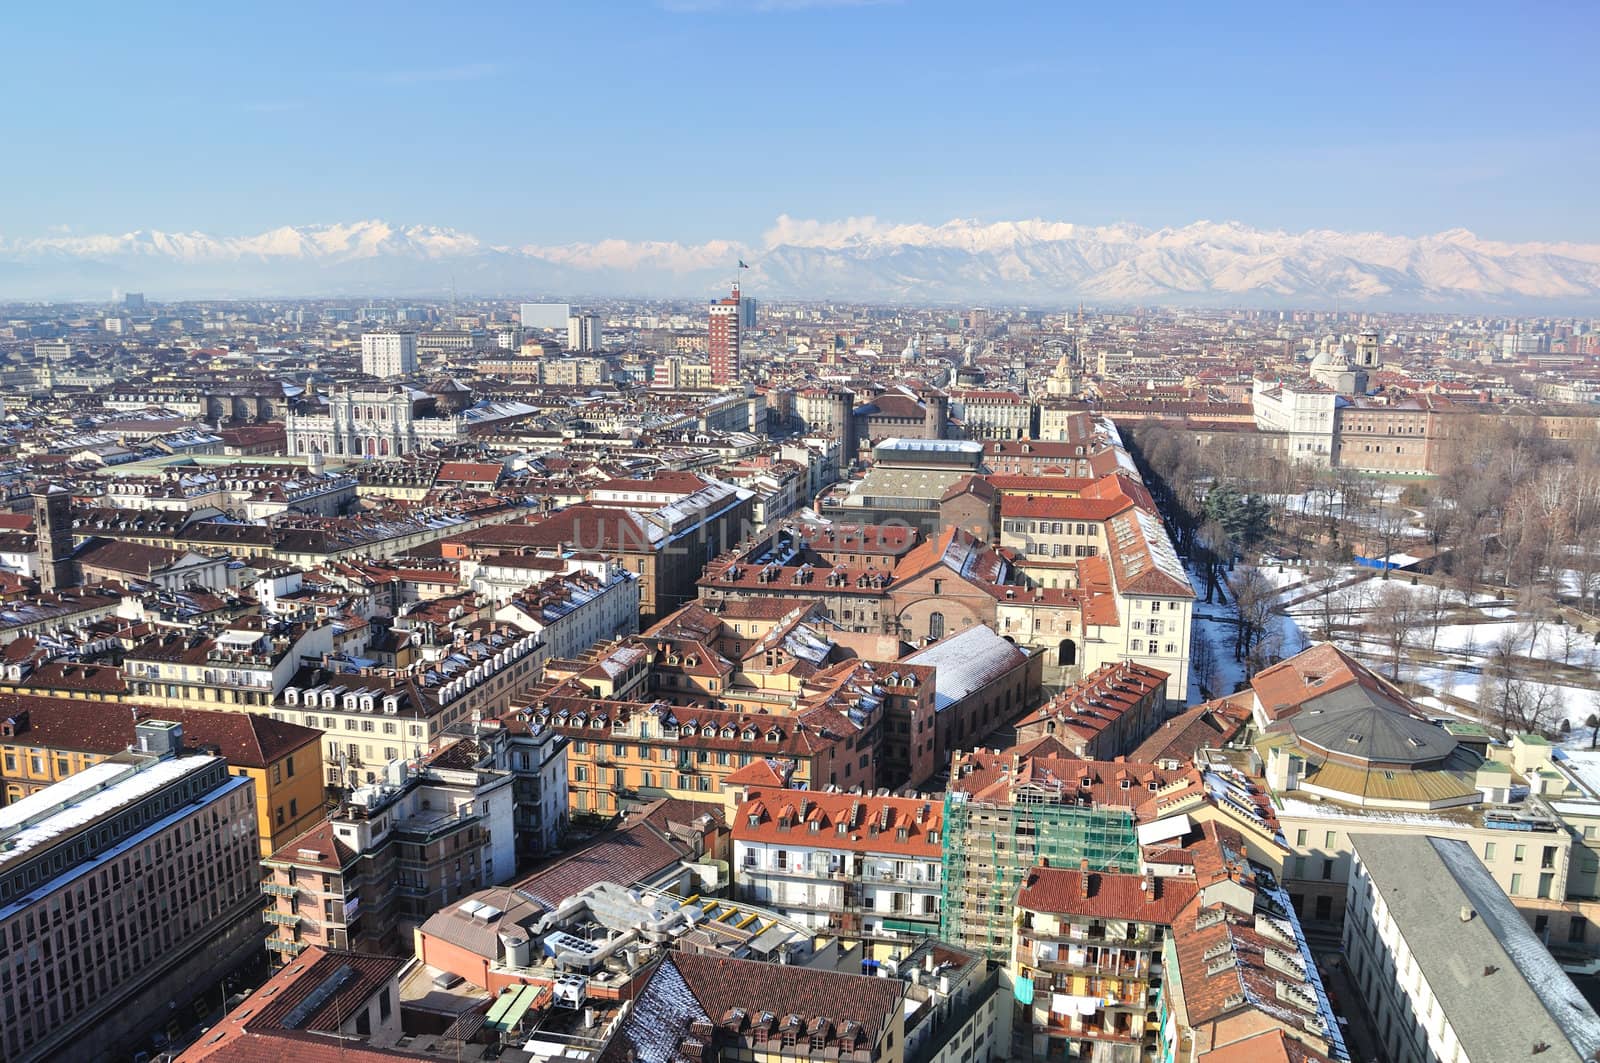 Turin is a major city as well as a business and cultural centre in northern Italy, capital of the Piedmont  region, located mainly on the left bank of the Po River surrounded by the Alpine arch.